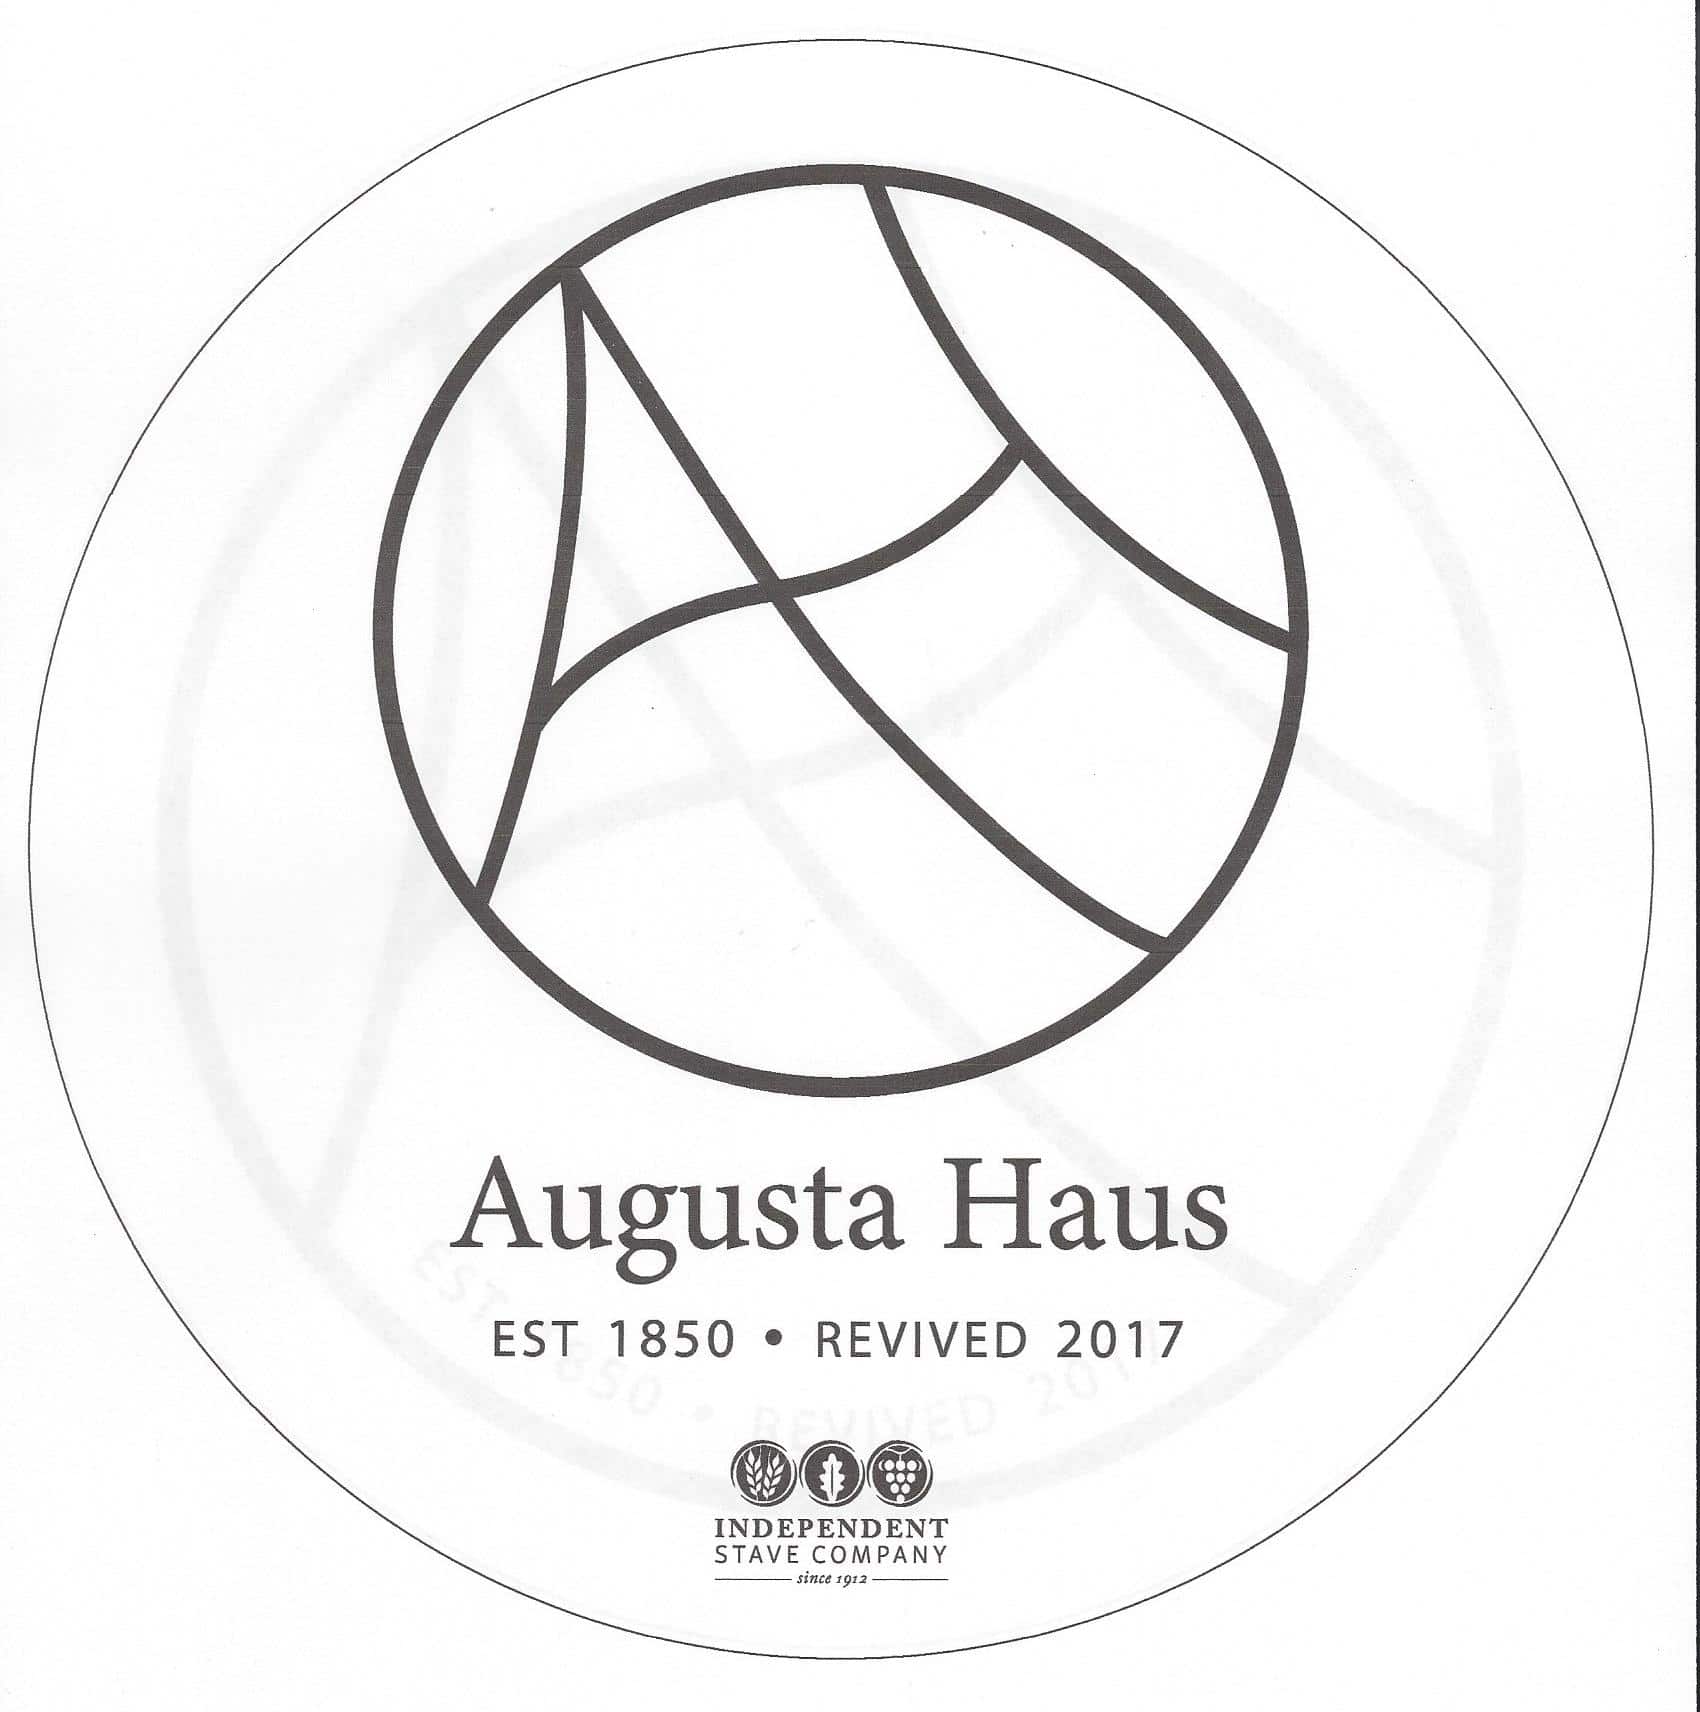 You are currently viewing Augusta Haus, LLC